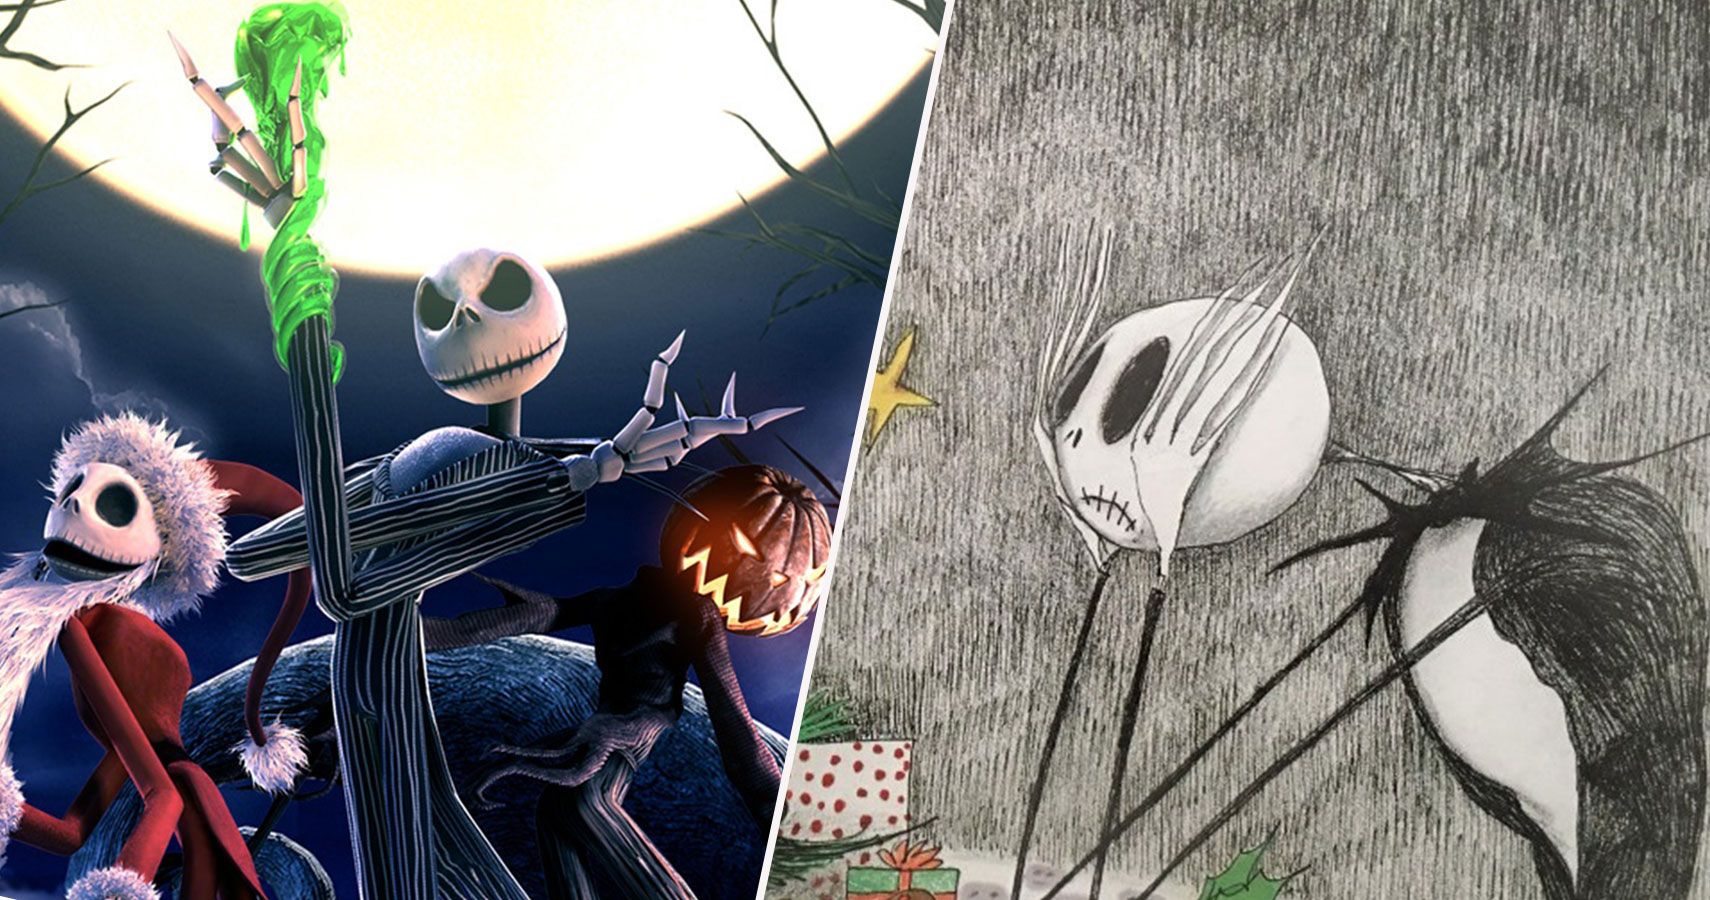 The Nightmare Before Christmas' Fans Will Want to See Disney's NEW